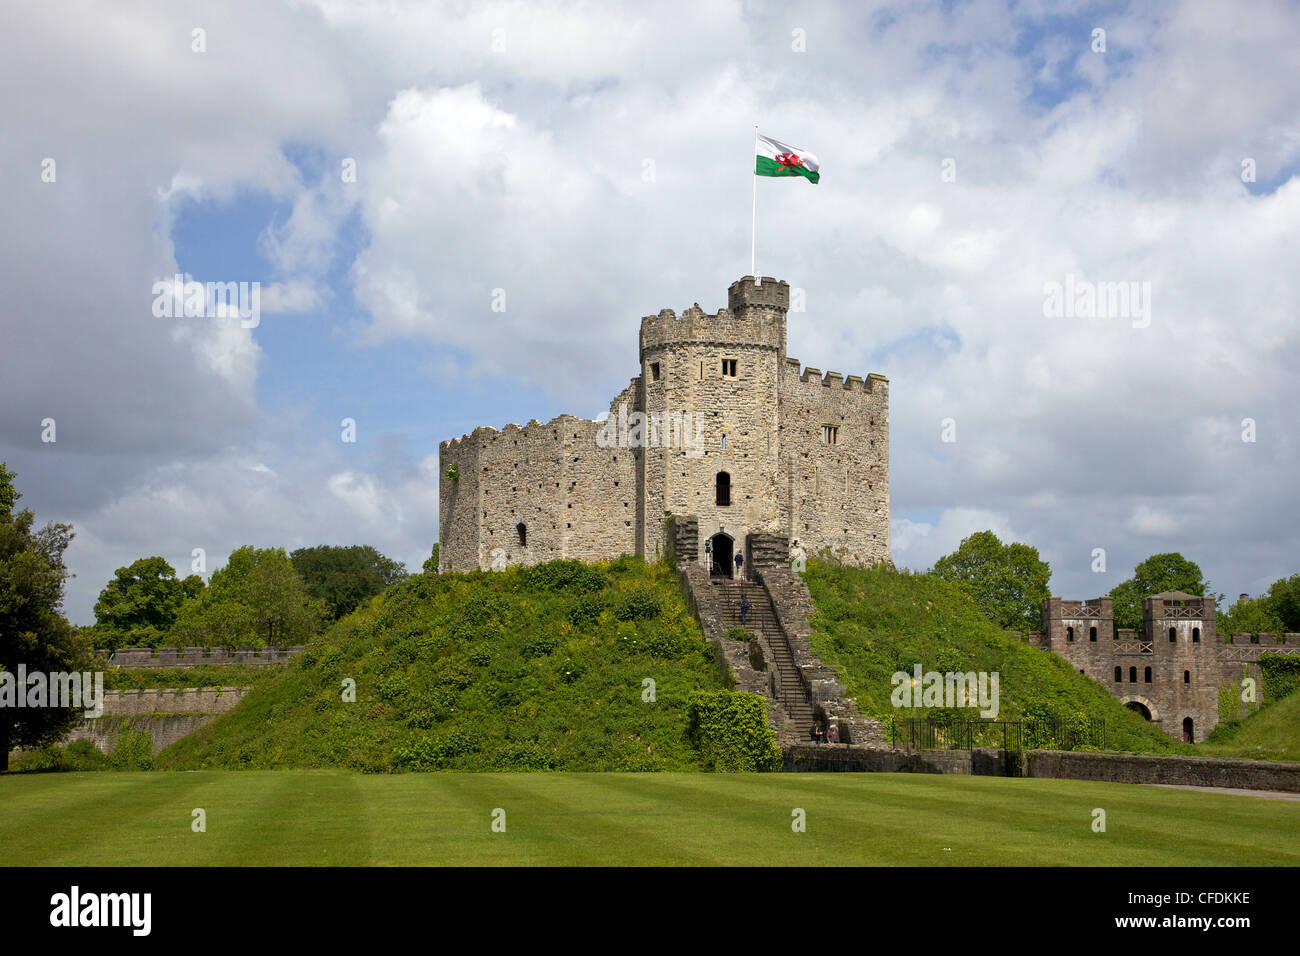 Nationale Flagge von Wales fliegen, Norman Keep, Schloss von Cardiff, Cardiff, South Glamorgan, South Wales, Wales, UK Stockfoto